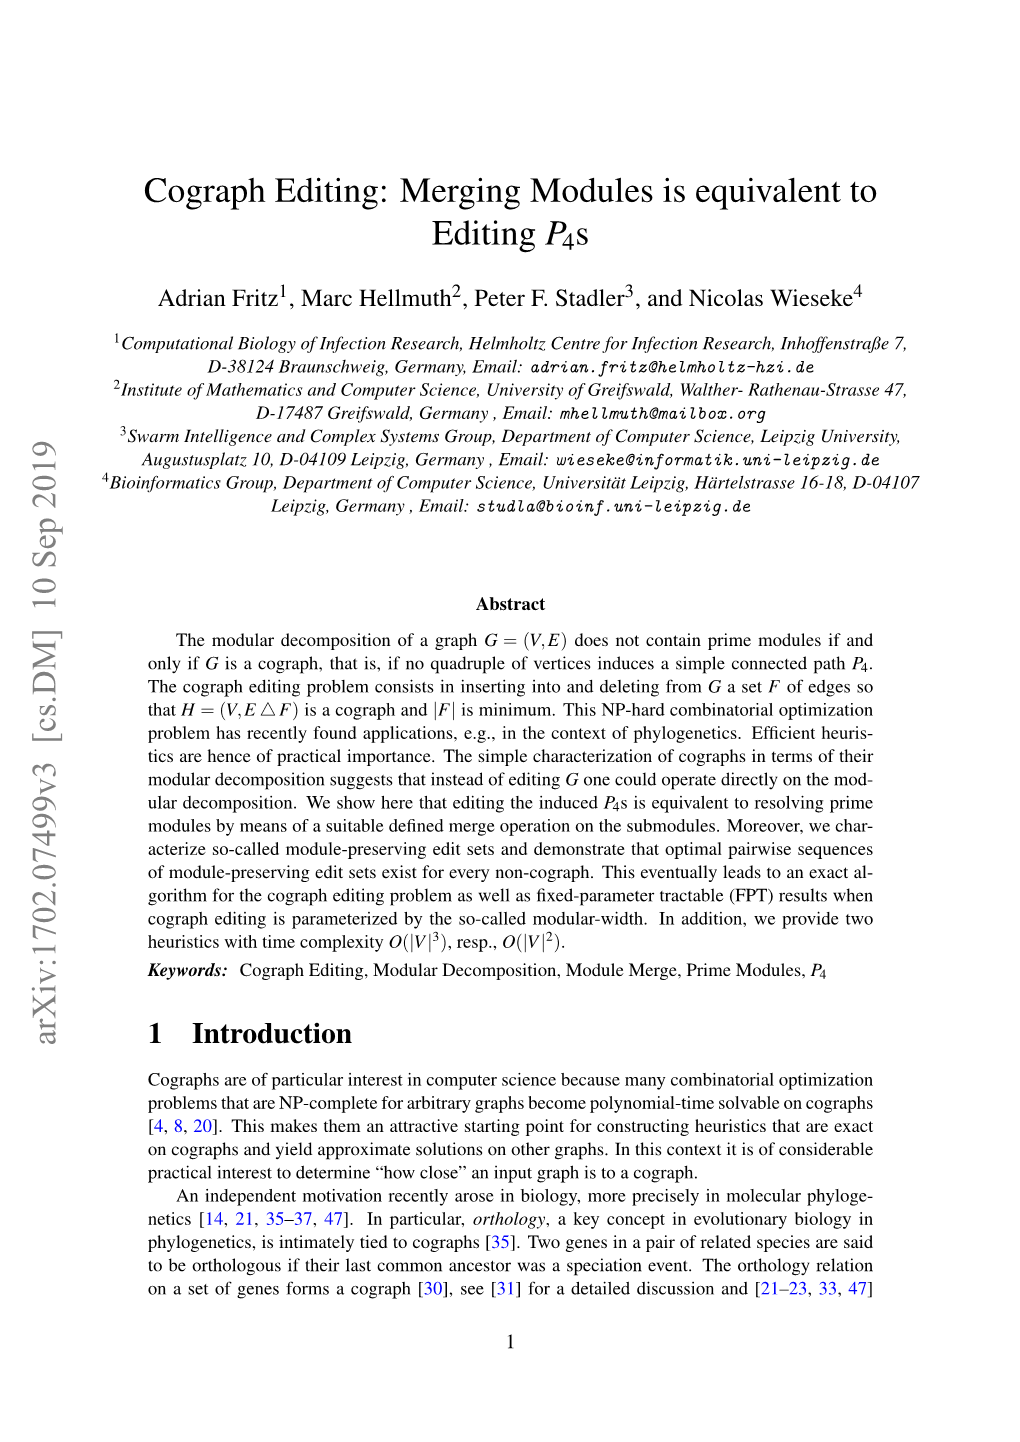 Cograph Editing: Merging Modules Is Equivalent to Editing P4s Arxiv